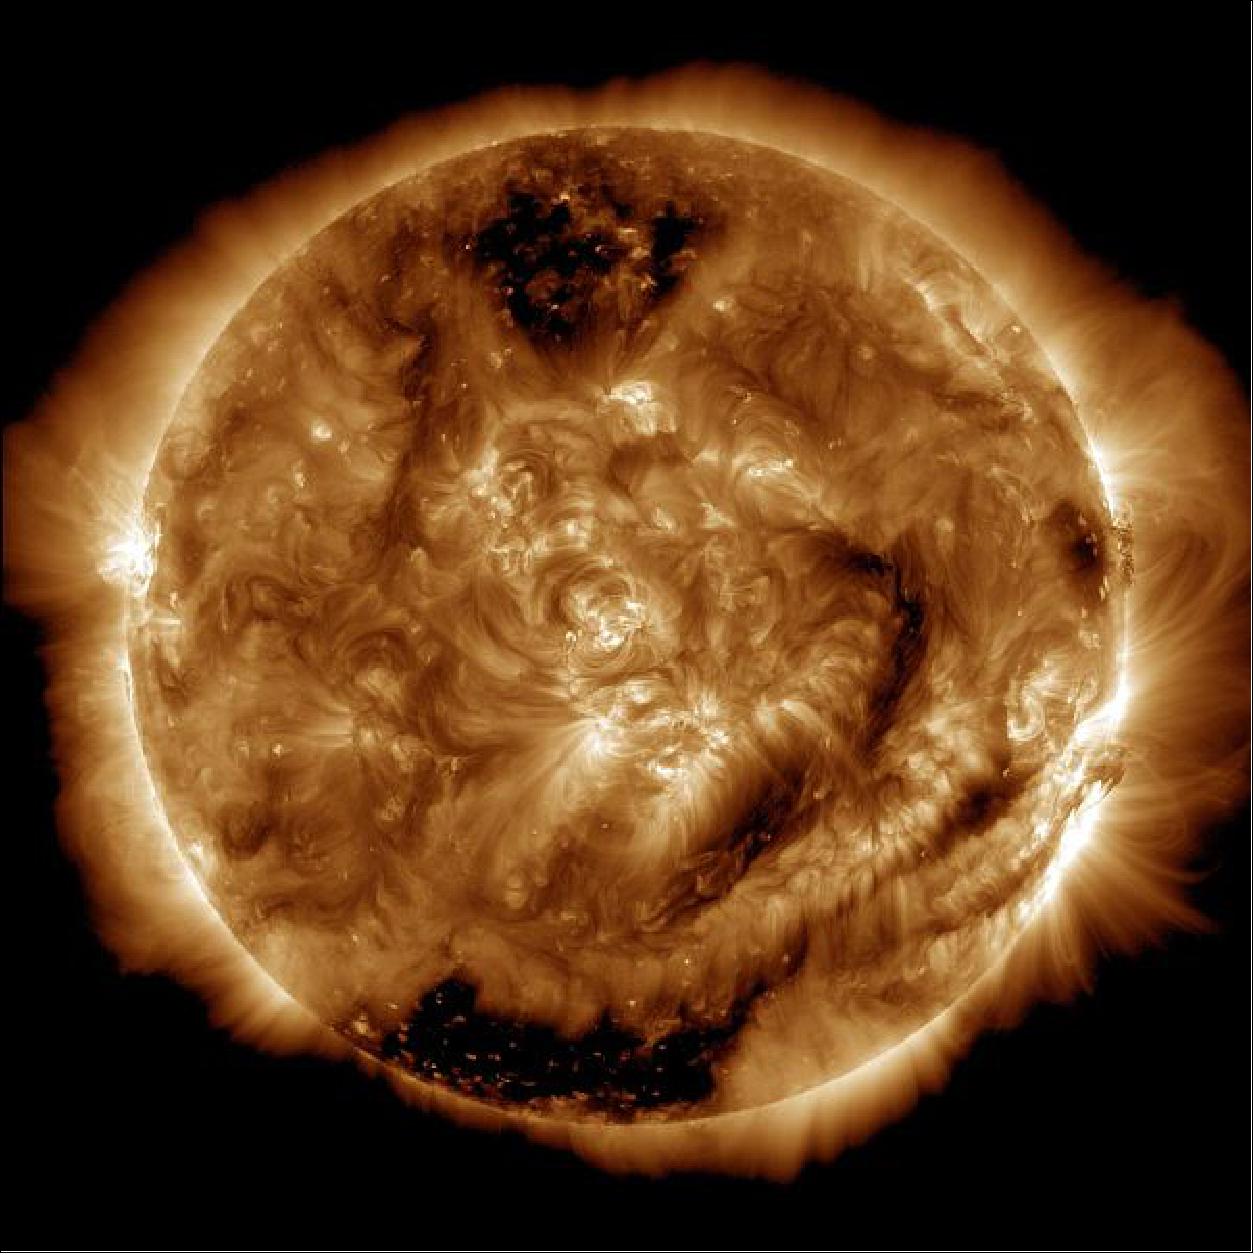 Figure 21: The 100 millionth image of the sun acquired by AIA on Jan. 19, 2015 (image credit: NASA)